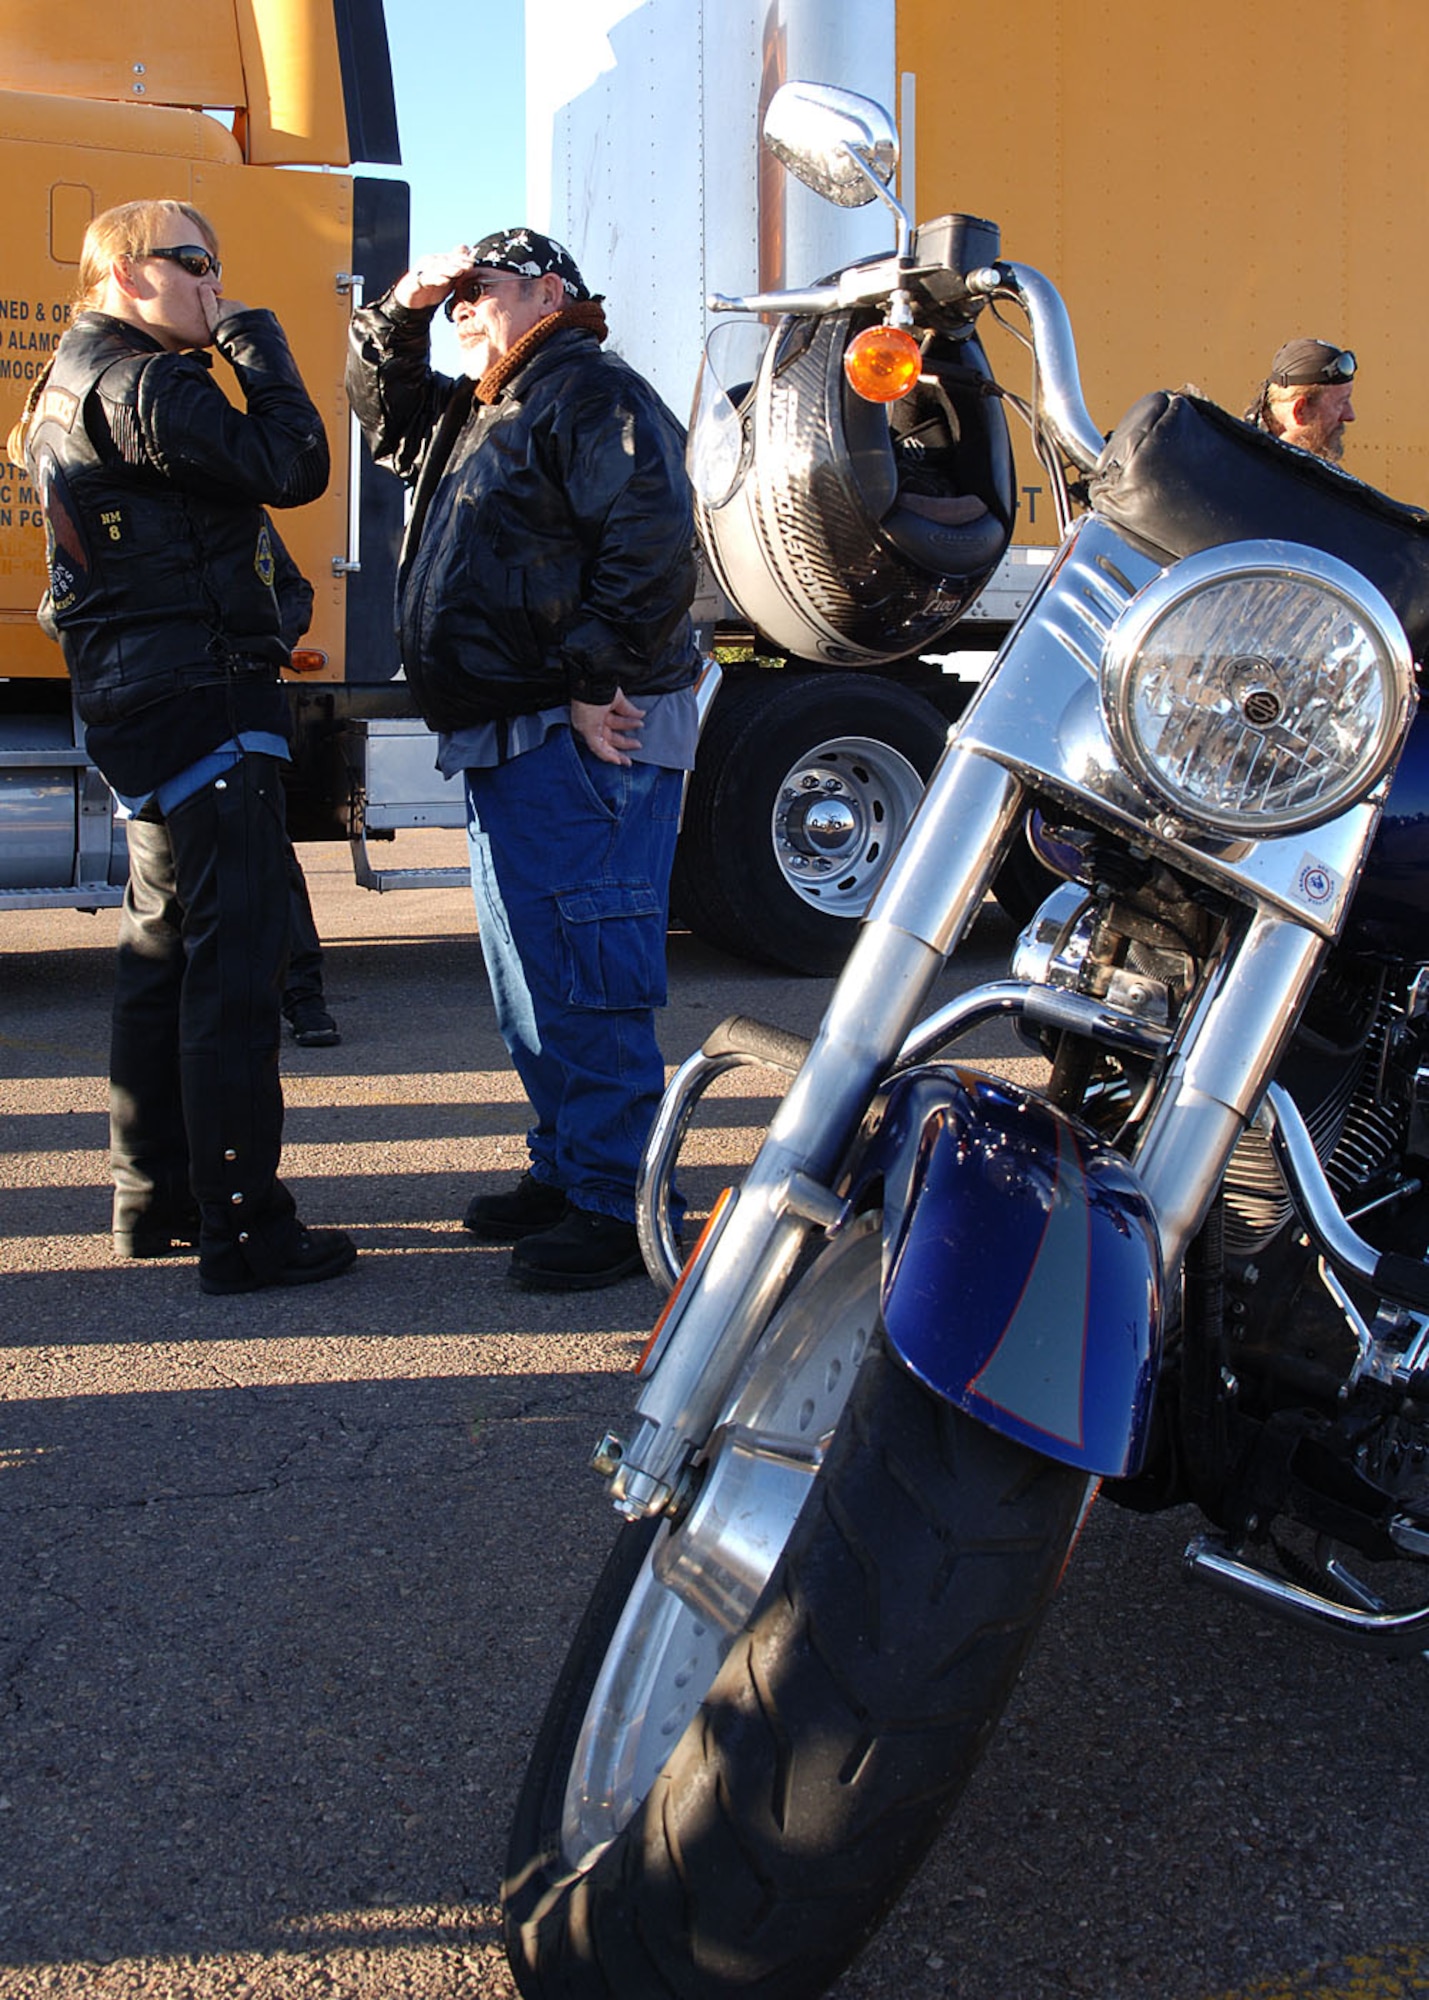 Members of the American Legion Riders converse before their trip to Brooke Army Medical Center, Texas, October 7, in Alamogordo, N.M.  The American Legion Riders pictured are apart of American Legion Riders Chapter 8, Post 108.  (U.S. Air Force photo by Airman 1st Class John D. Strong II)